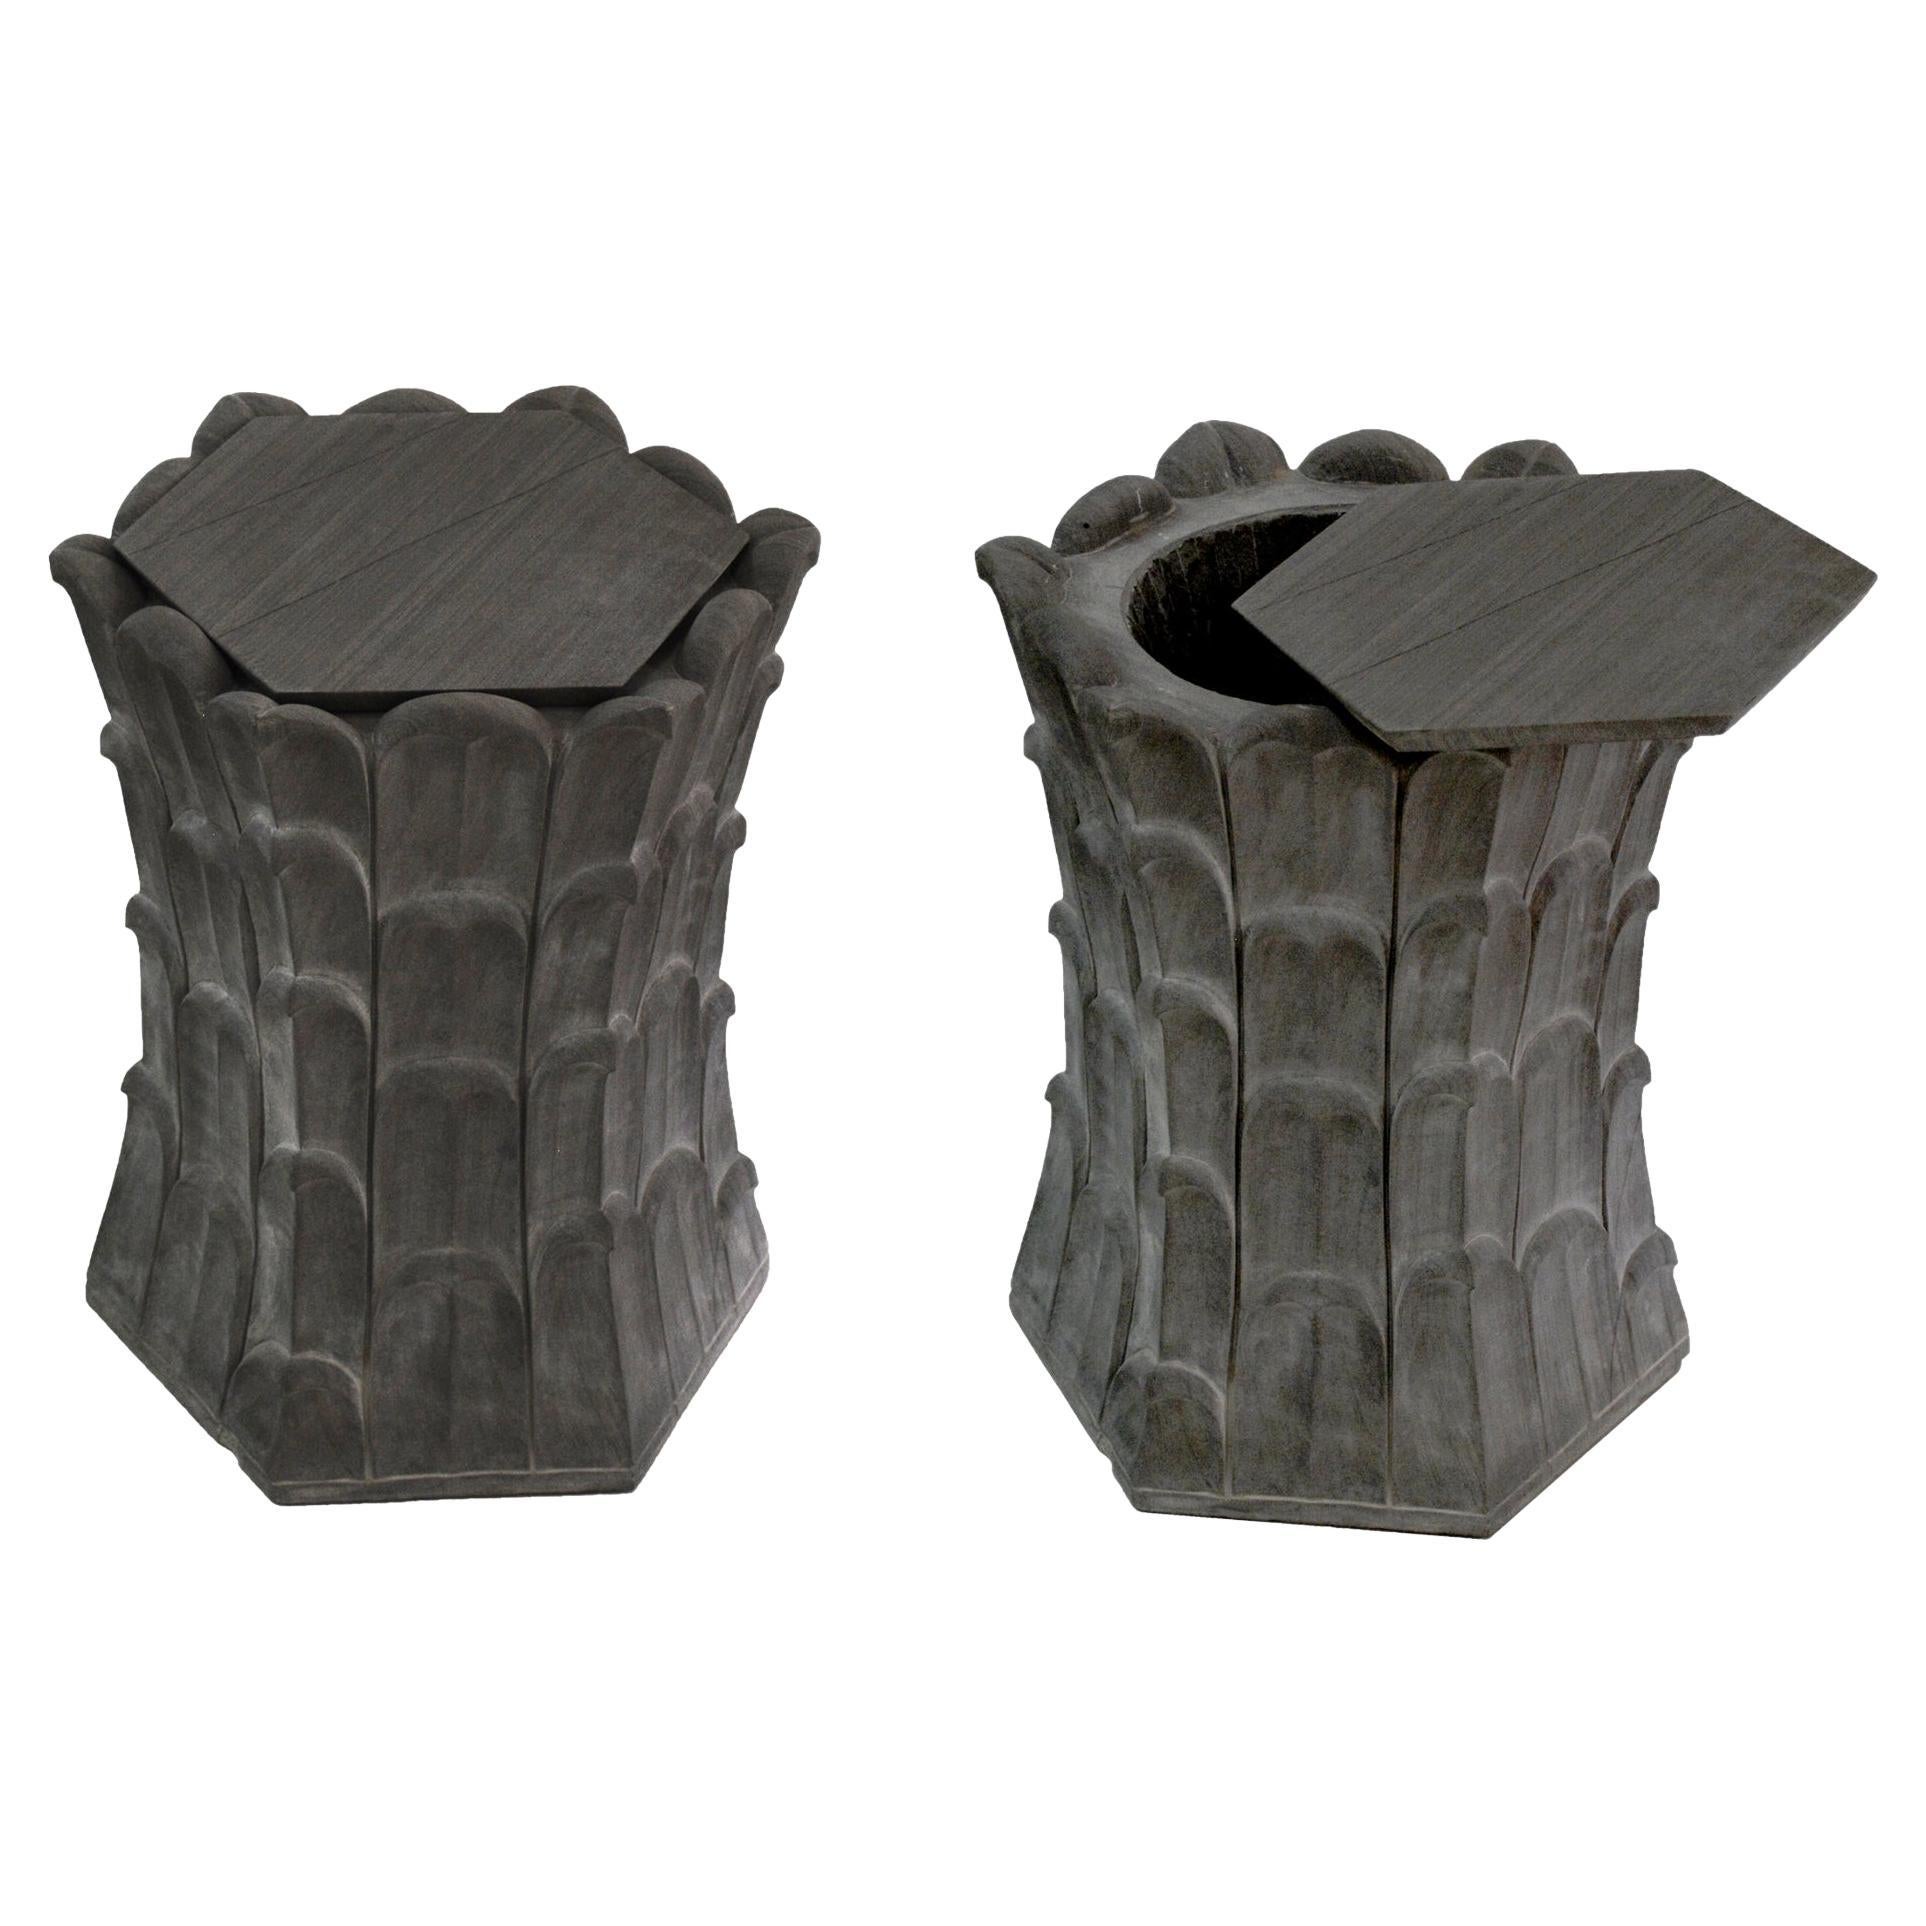 Set of Two Bamboo Grove Side Tables in Agra Grey Stone Handcrafted in India